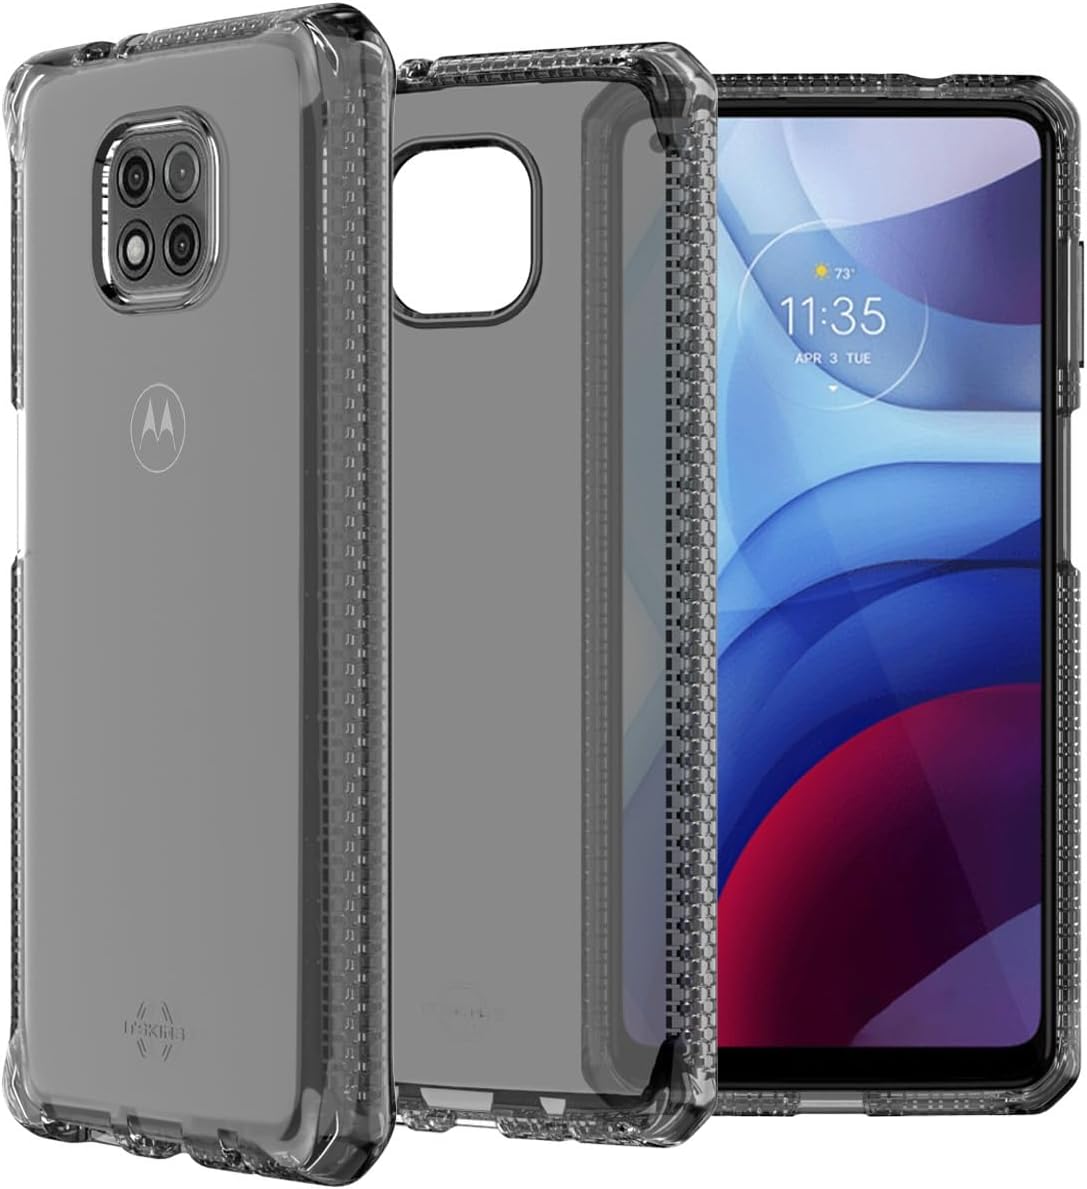 Itskins Spectrum Clear Protective Phone Case Compatible with Moto G Power, Slim Hybrid Case, Anti-Yellowing, and Heavy Duty Shockproof Cover, Military Phone Case | Smoke